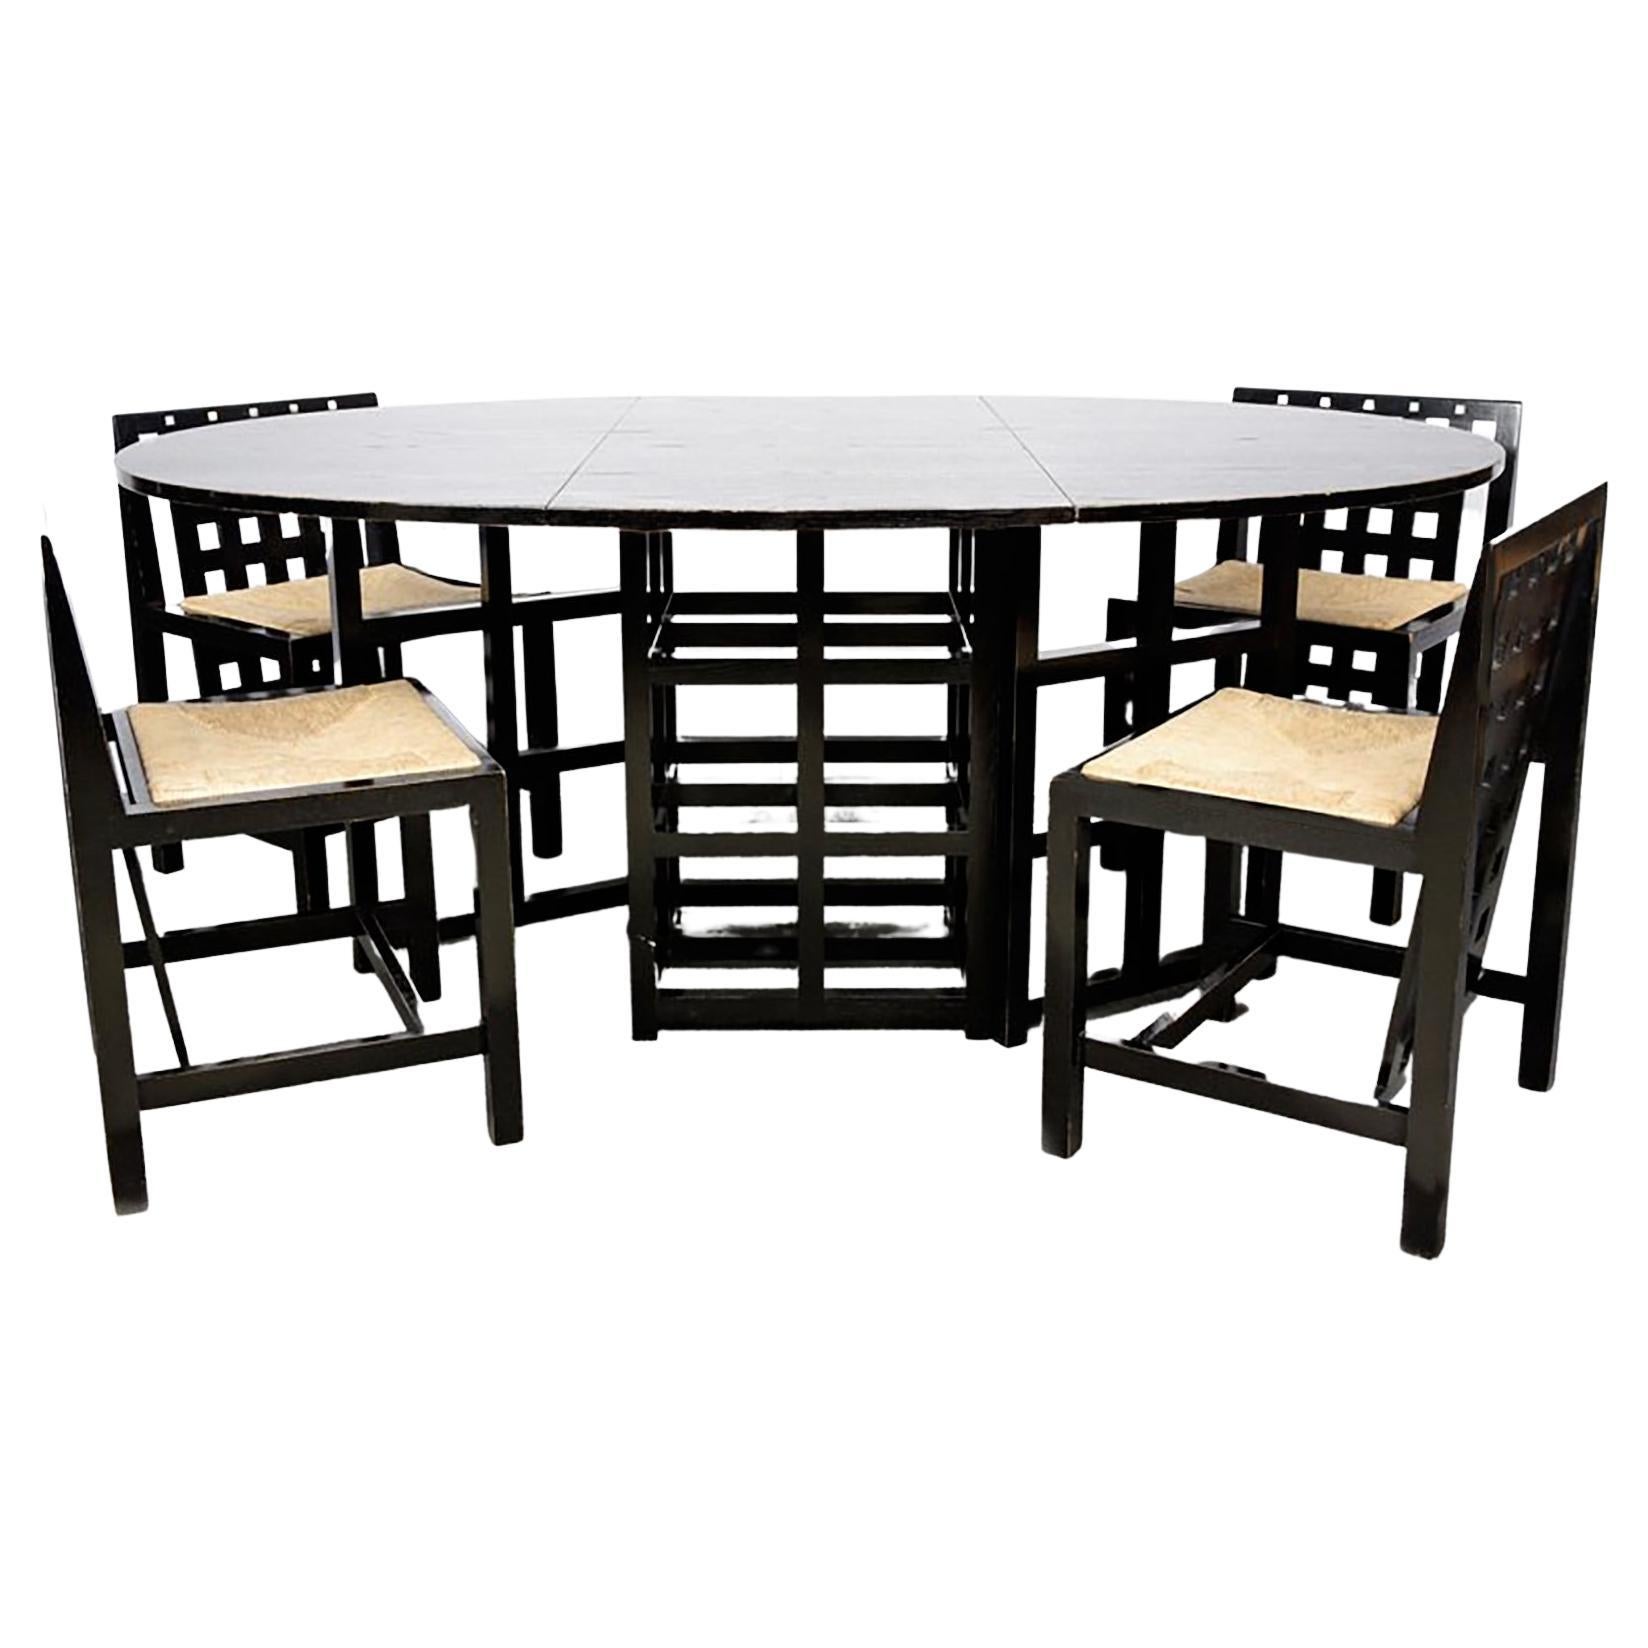 1970s Italian Black Oval Folding Table and Four Chairs designed by Mackintosh 